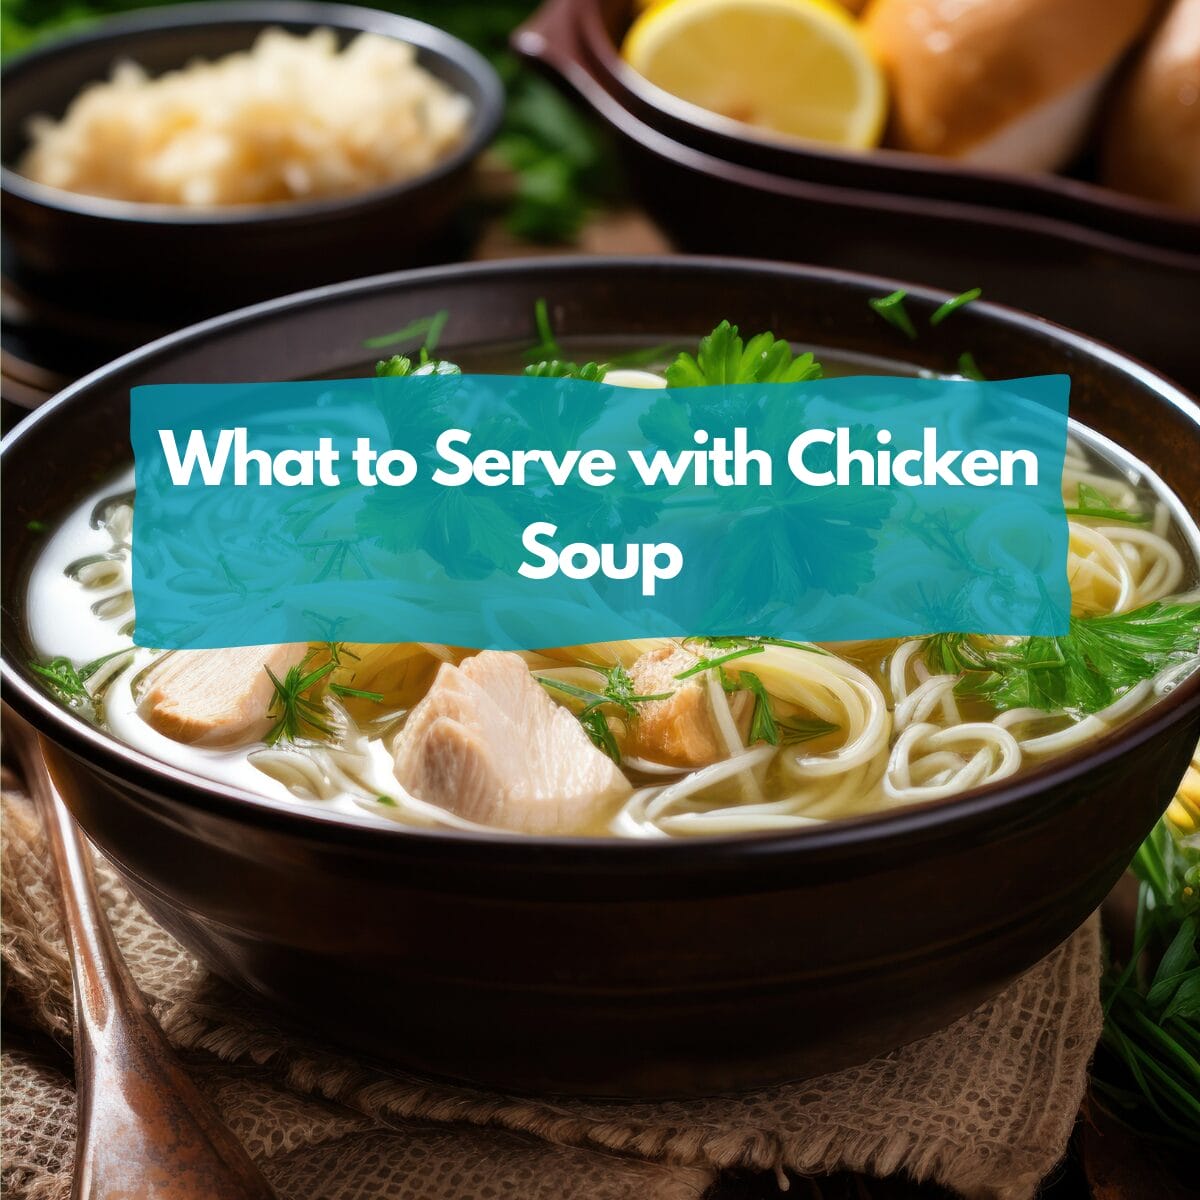 What to Serve with Chicken Soup